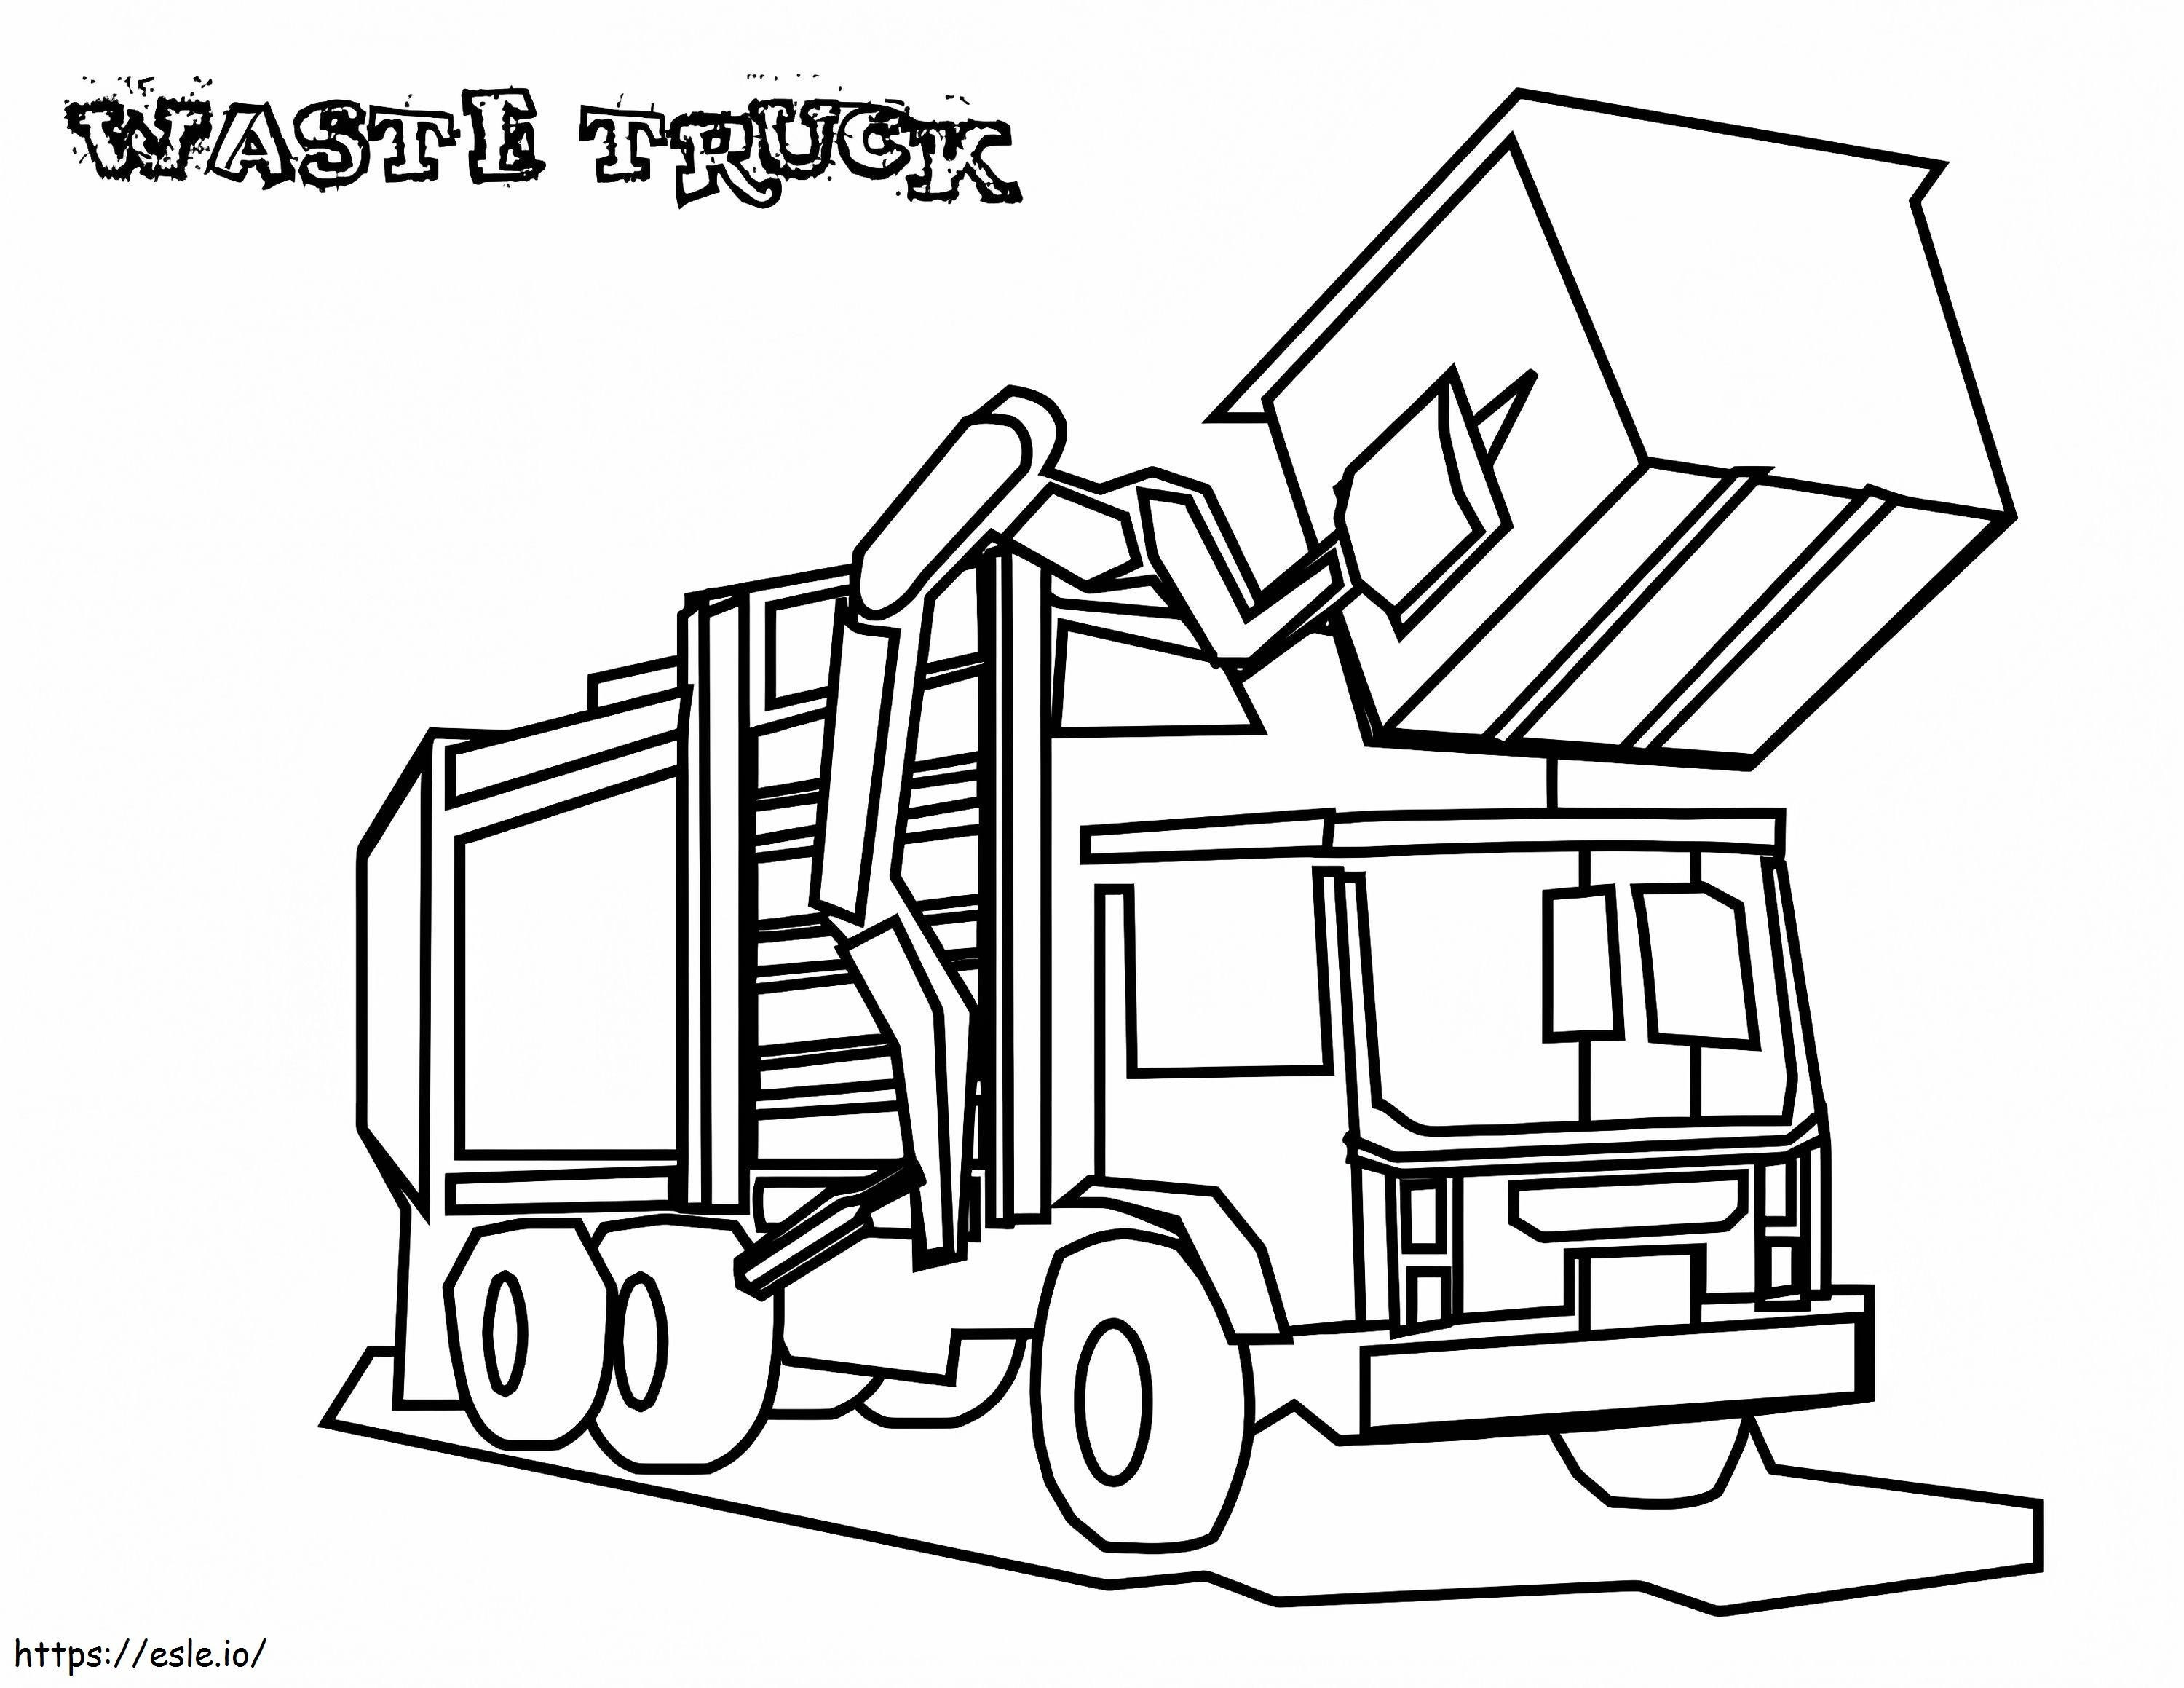 Garbage Truck coloring page